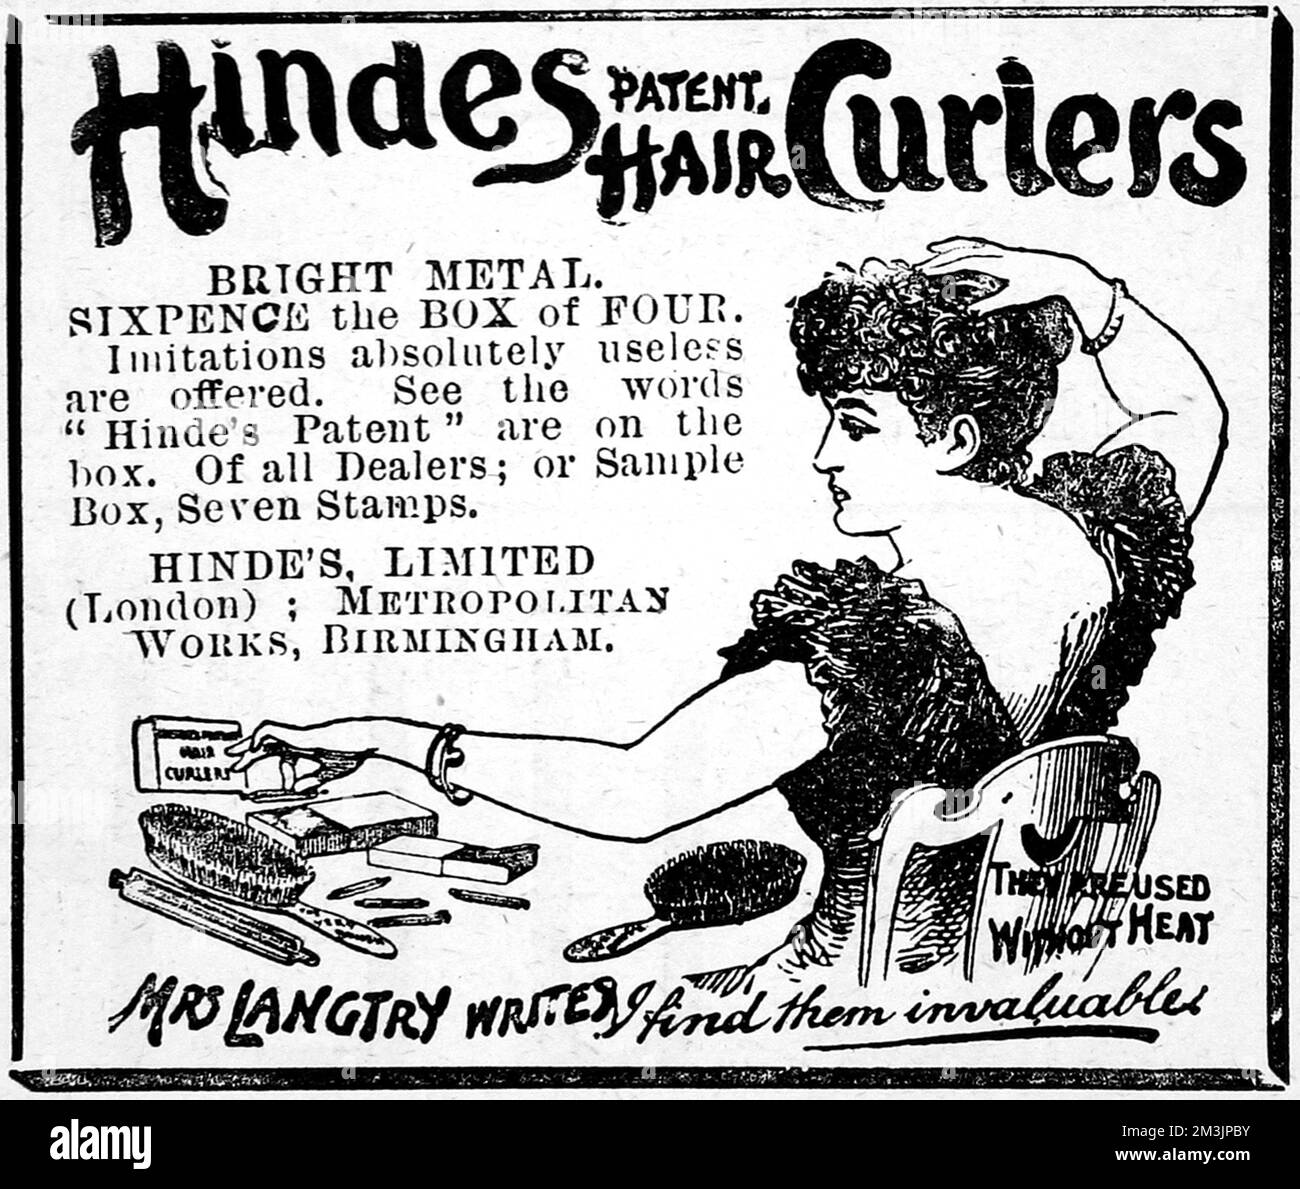 Advertisement for Hindes patent Hair curlers from 1892 with and endorsement by Lily Langtry.     Date: May 14th 1892 Stock Photo